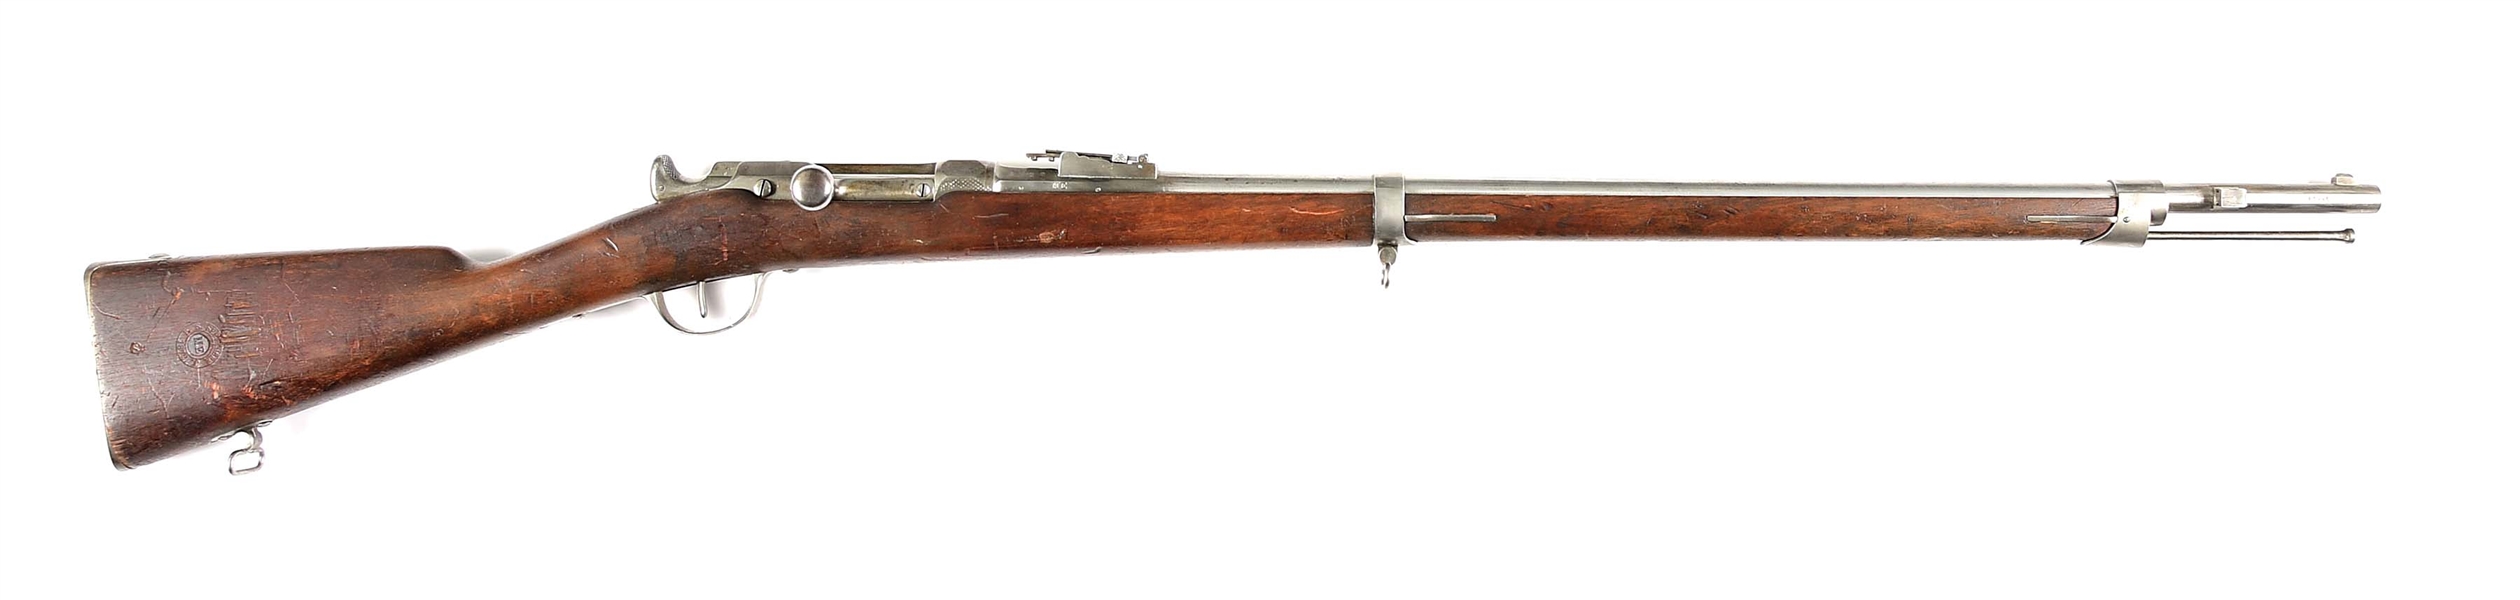 (A) FRENCH MLE 1866 CHASSEPOT 11MM BOLT ACTION SINGLE SHOT RIFLE 